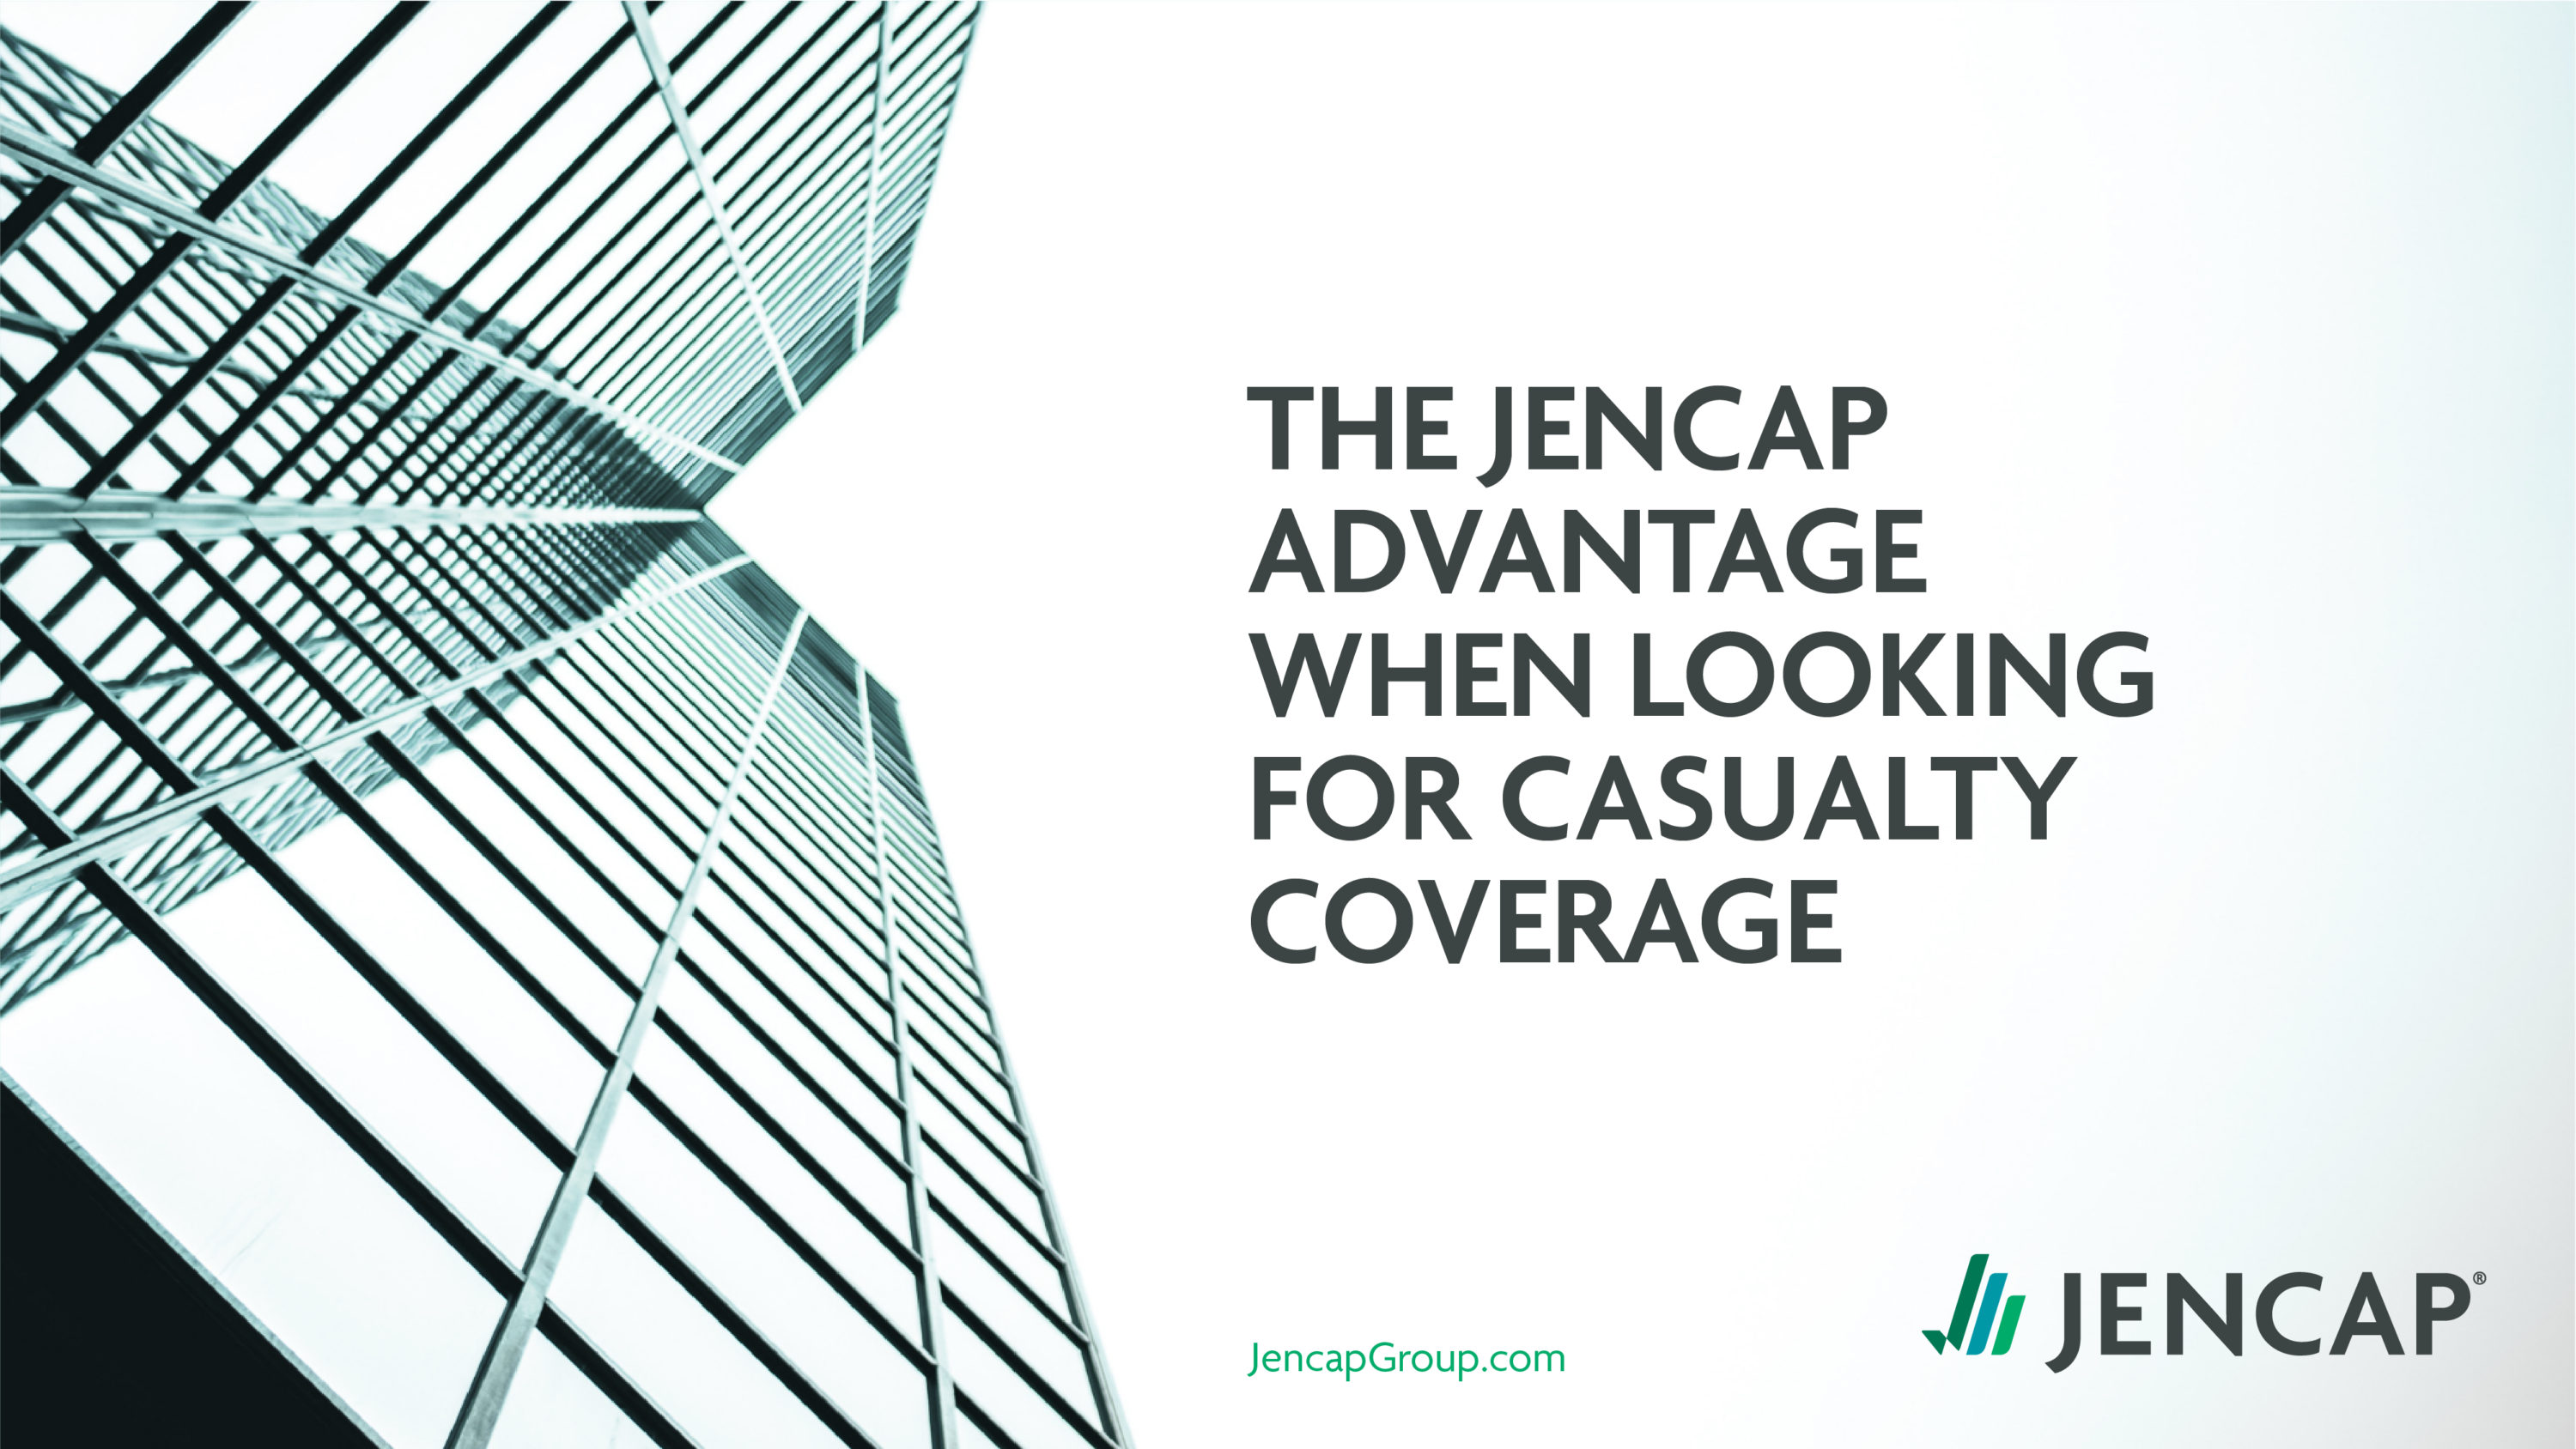 The Jencap Advantage when looking for Casualty Coverage